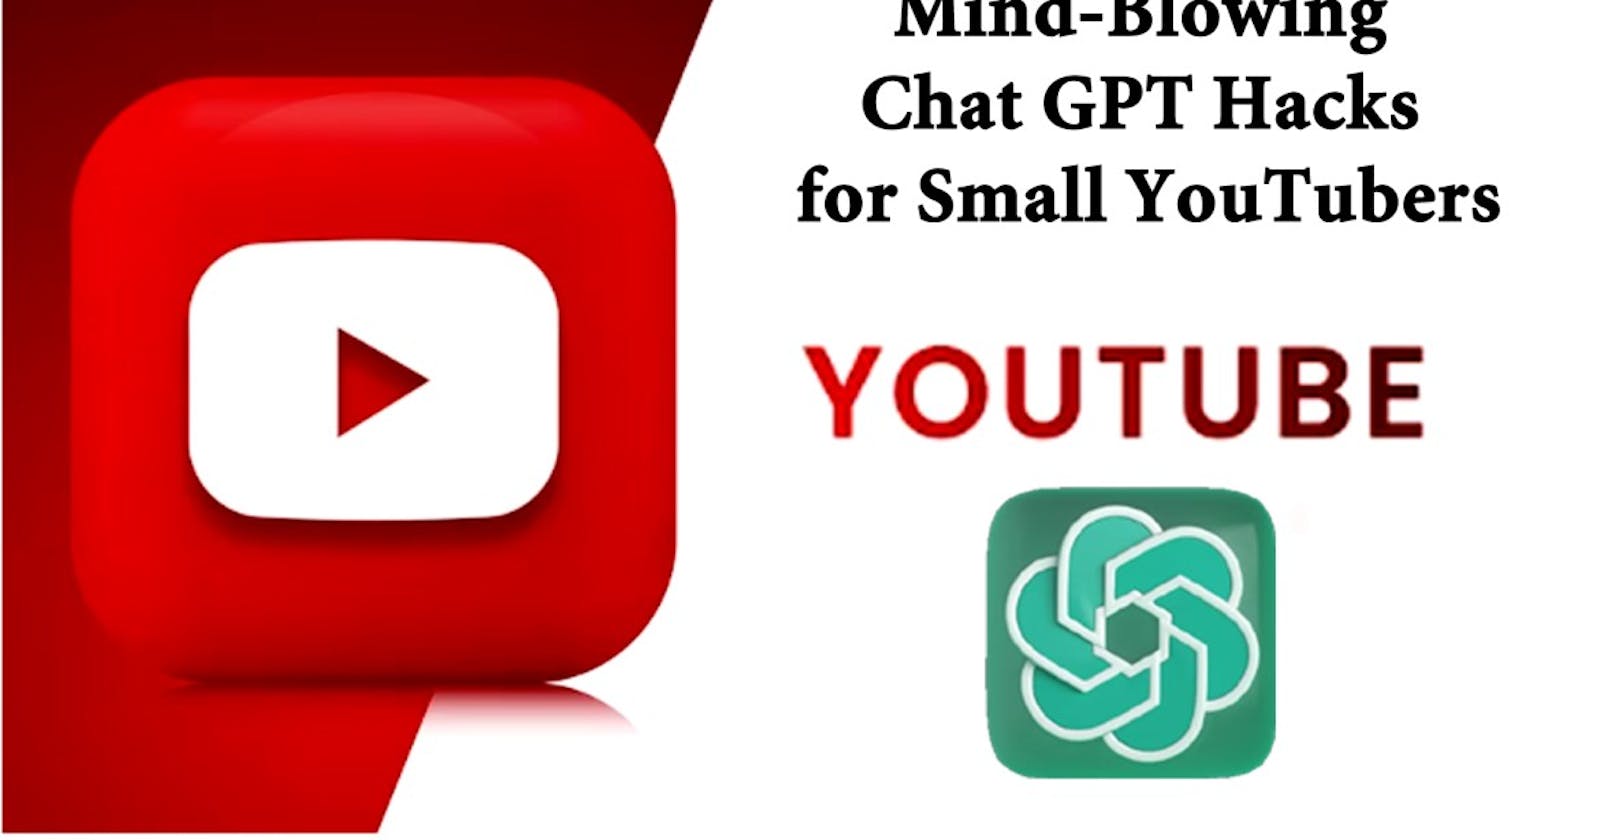 Don’t Miss These ChatGPT Hacks for Small YouTubers!